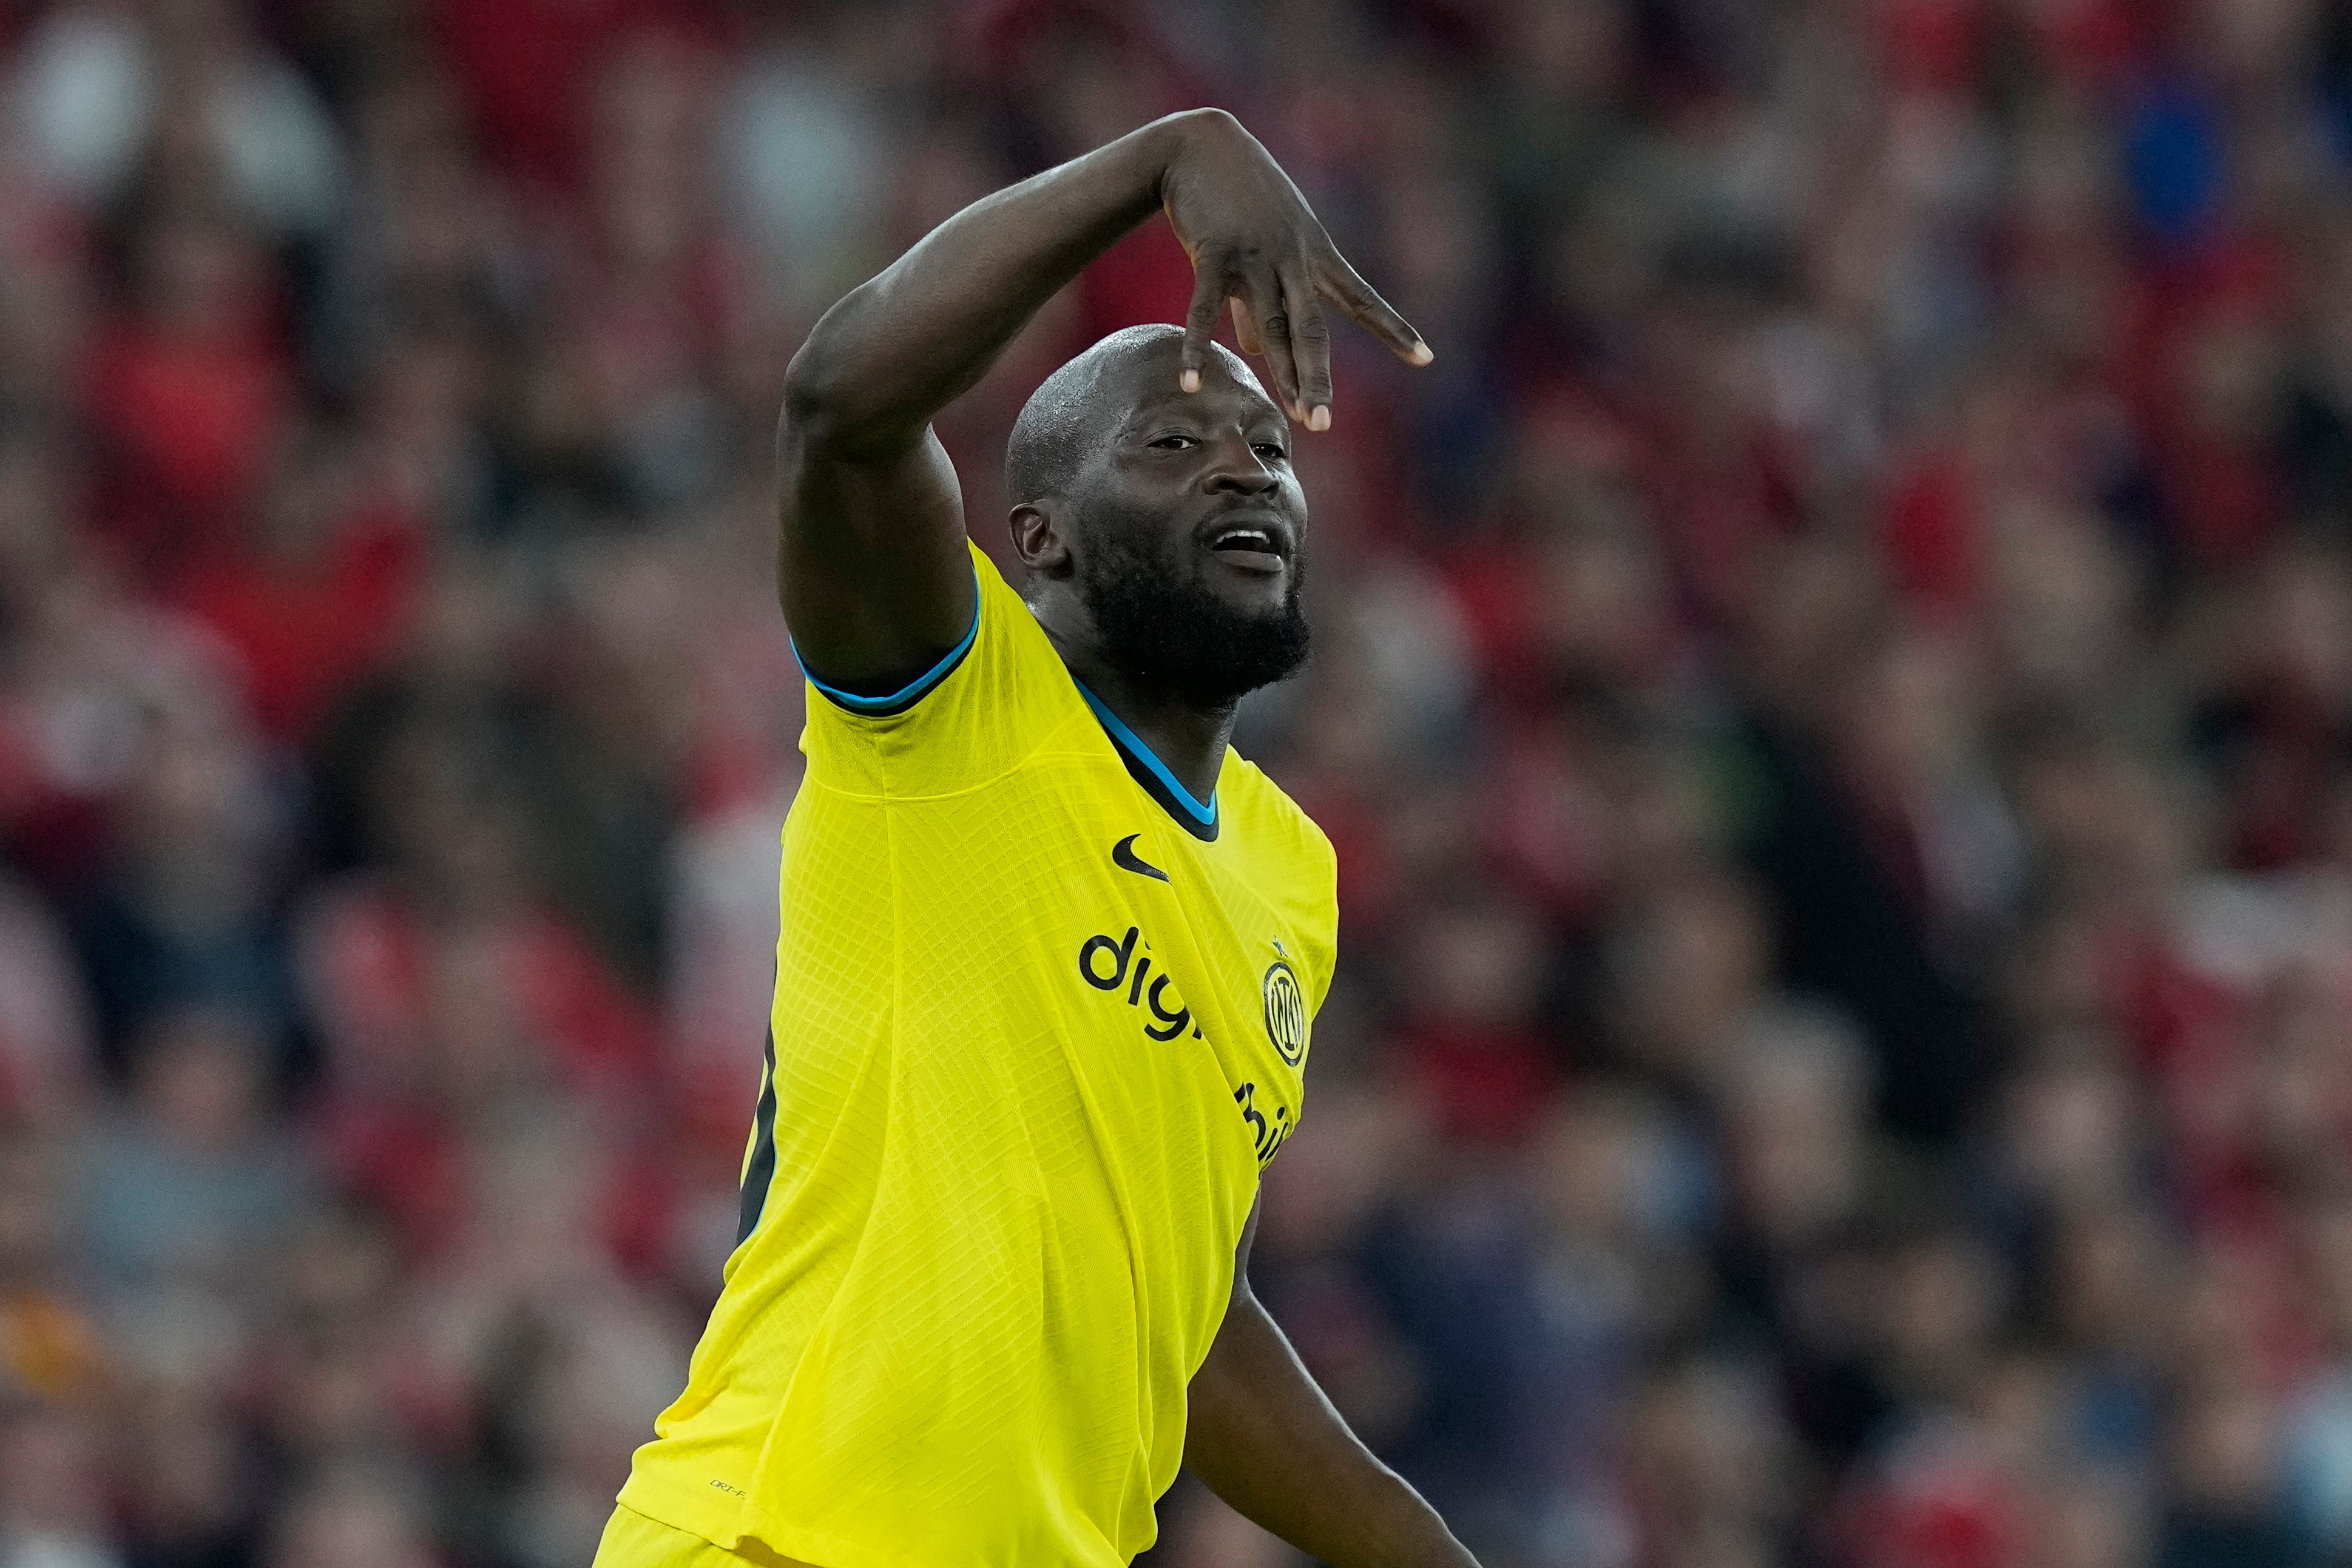 Romelu Lukaku scored a penalty to help Inter take complete control against Benfica